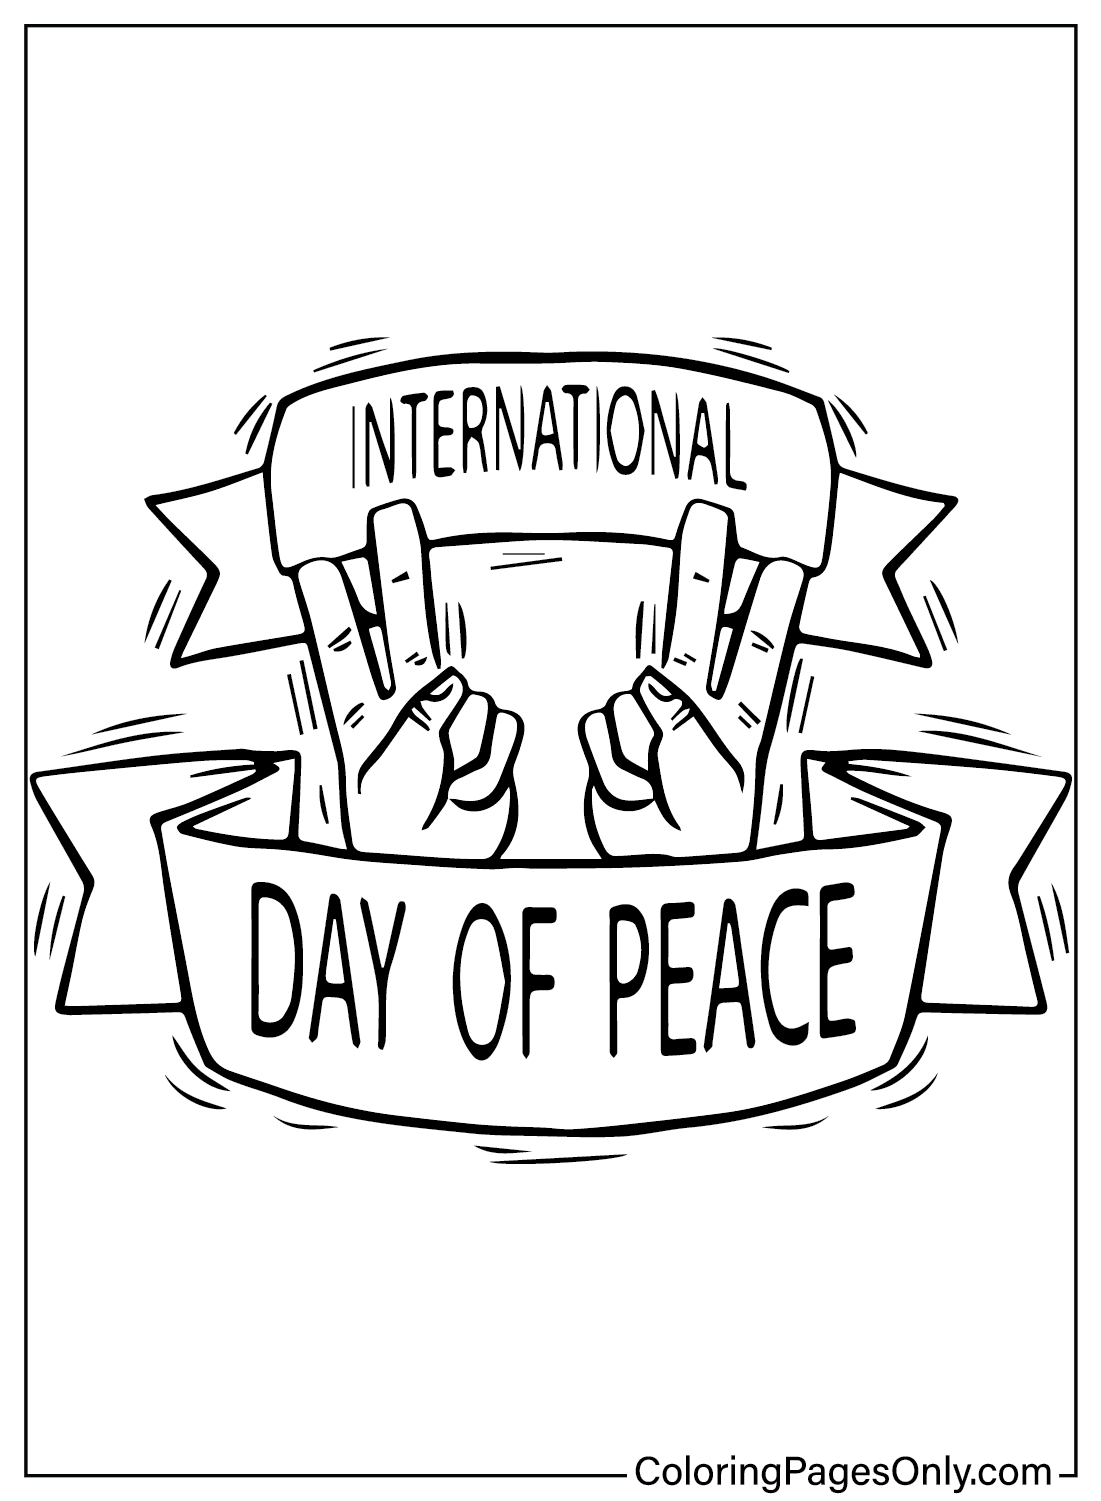 International Day of Peace Coloring Page PDF